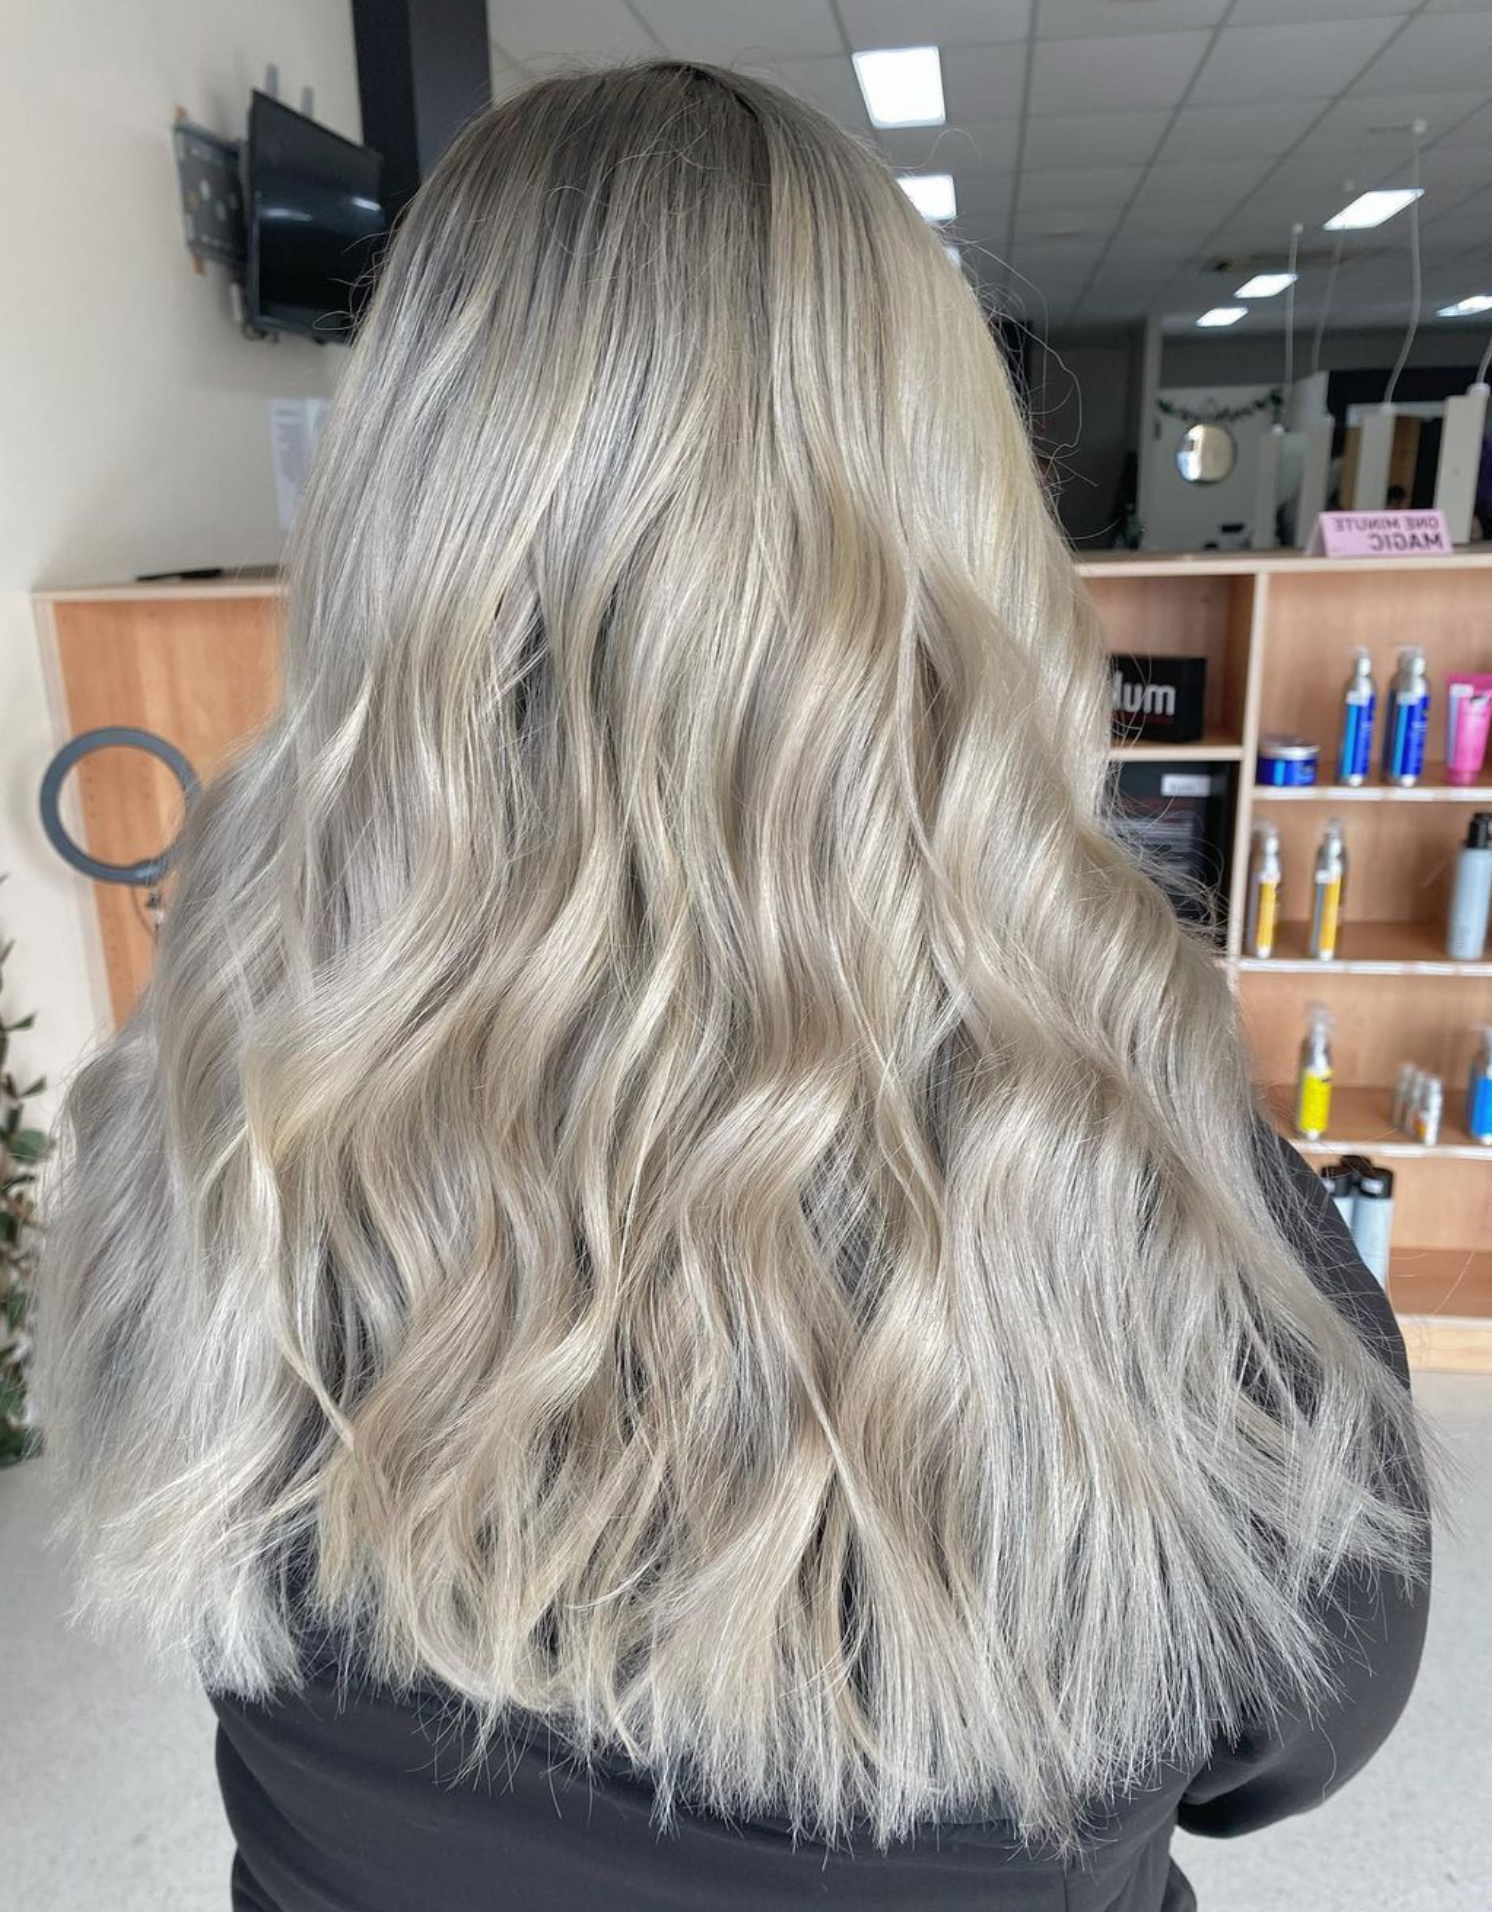 Woman With Blonde Hair Extensions - Salon in Ballarat, VIC